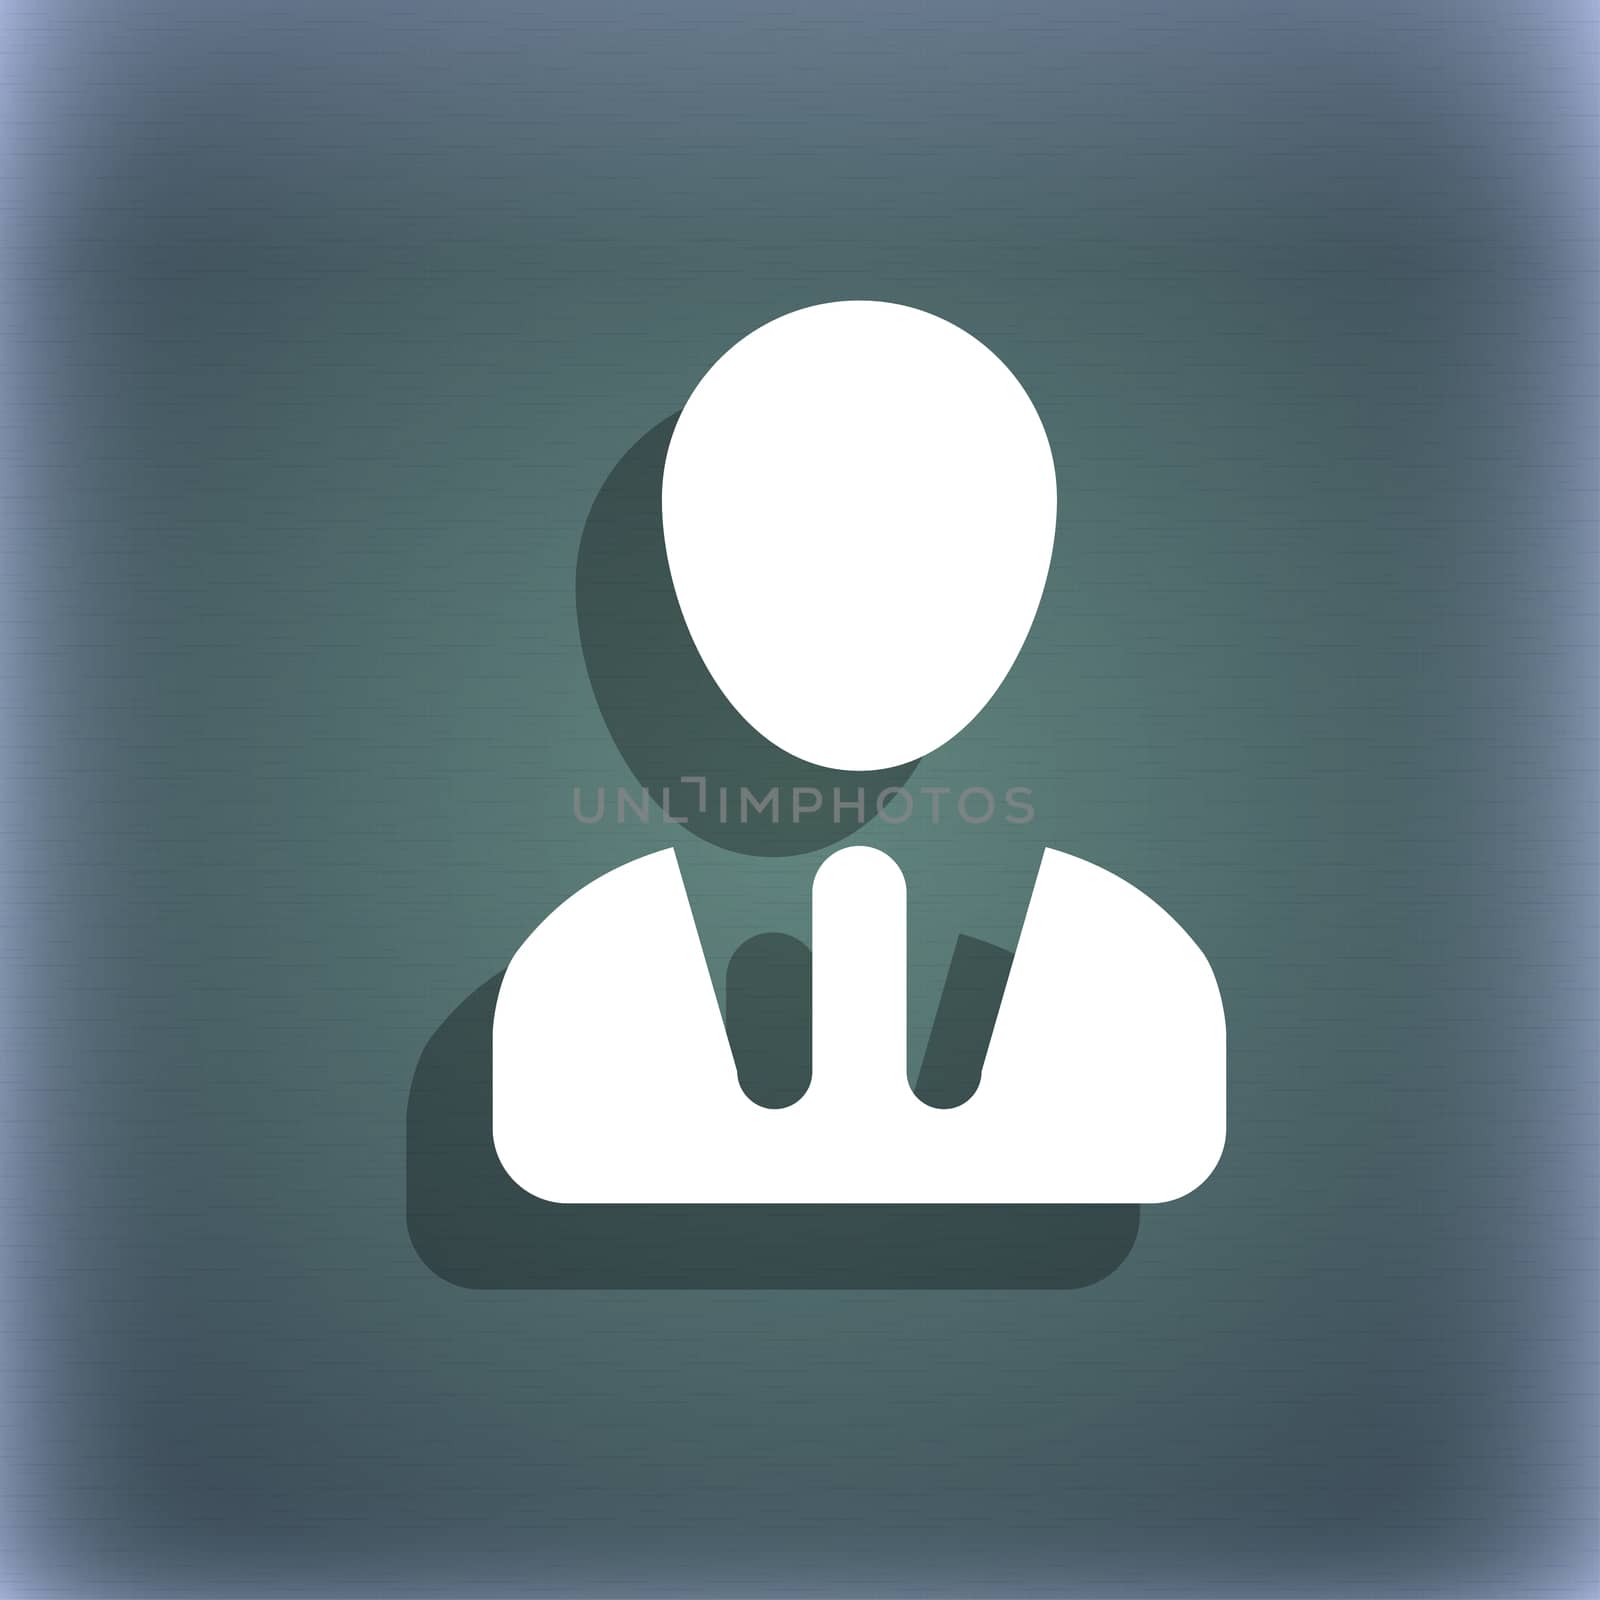 male silhouette icon symbol on the blue-green abstract background with shadow and space for your text. illustration